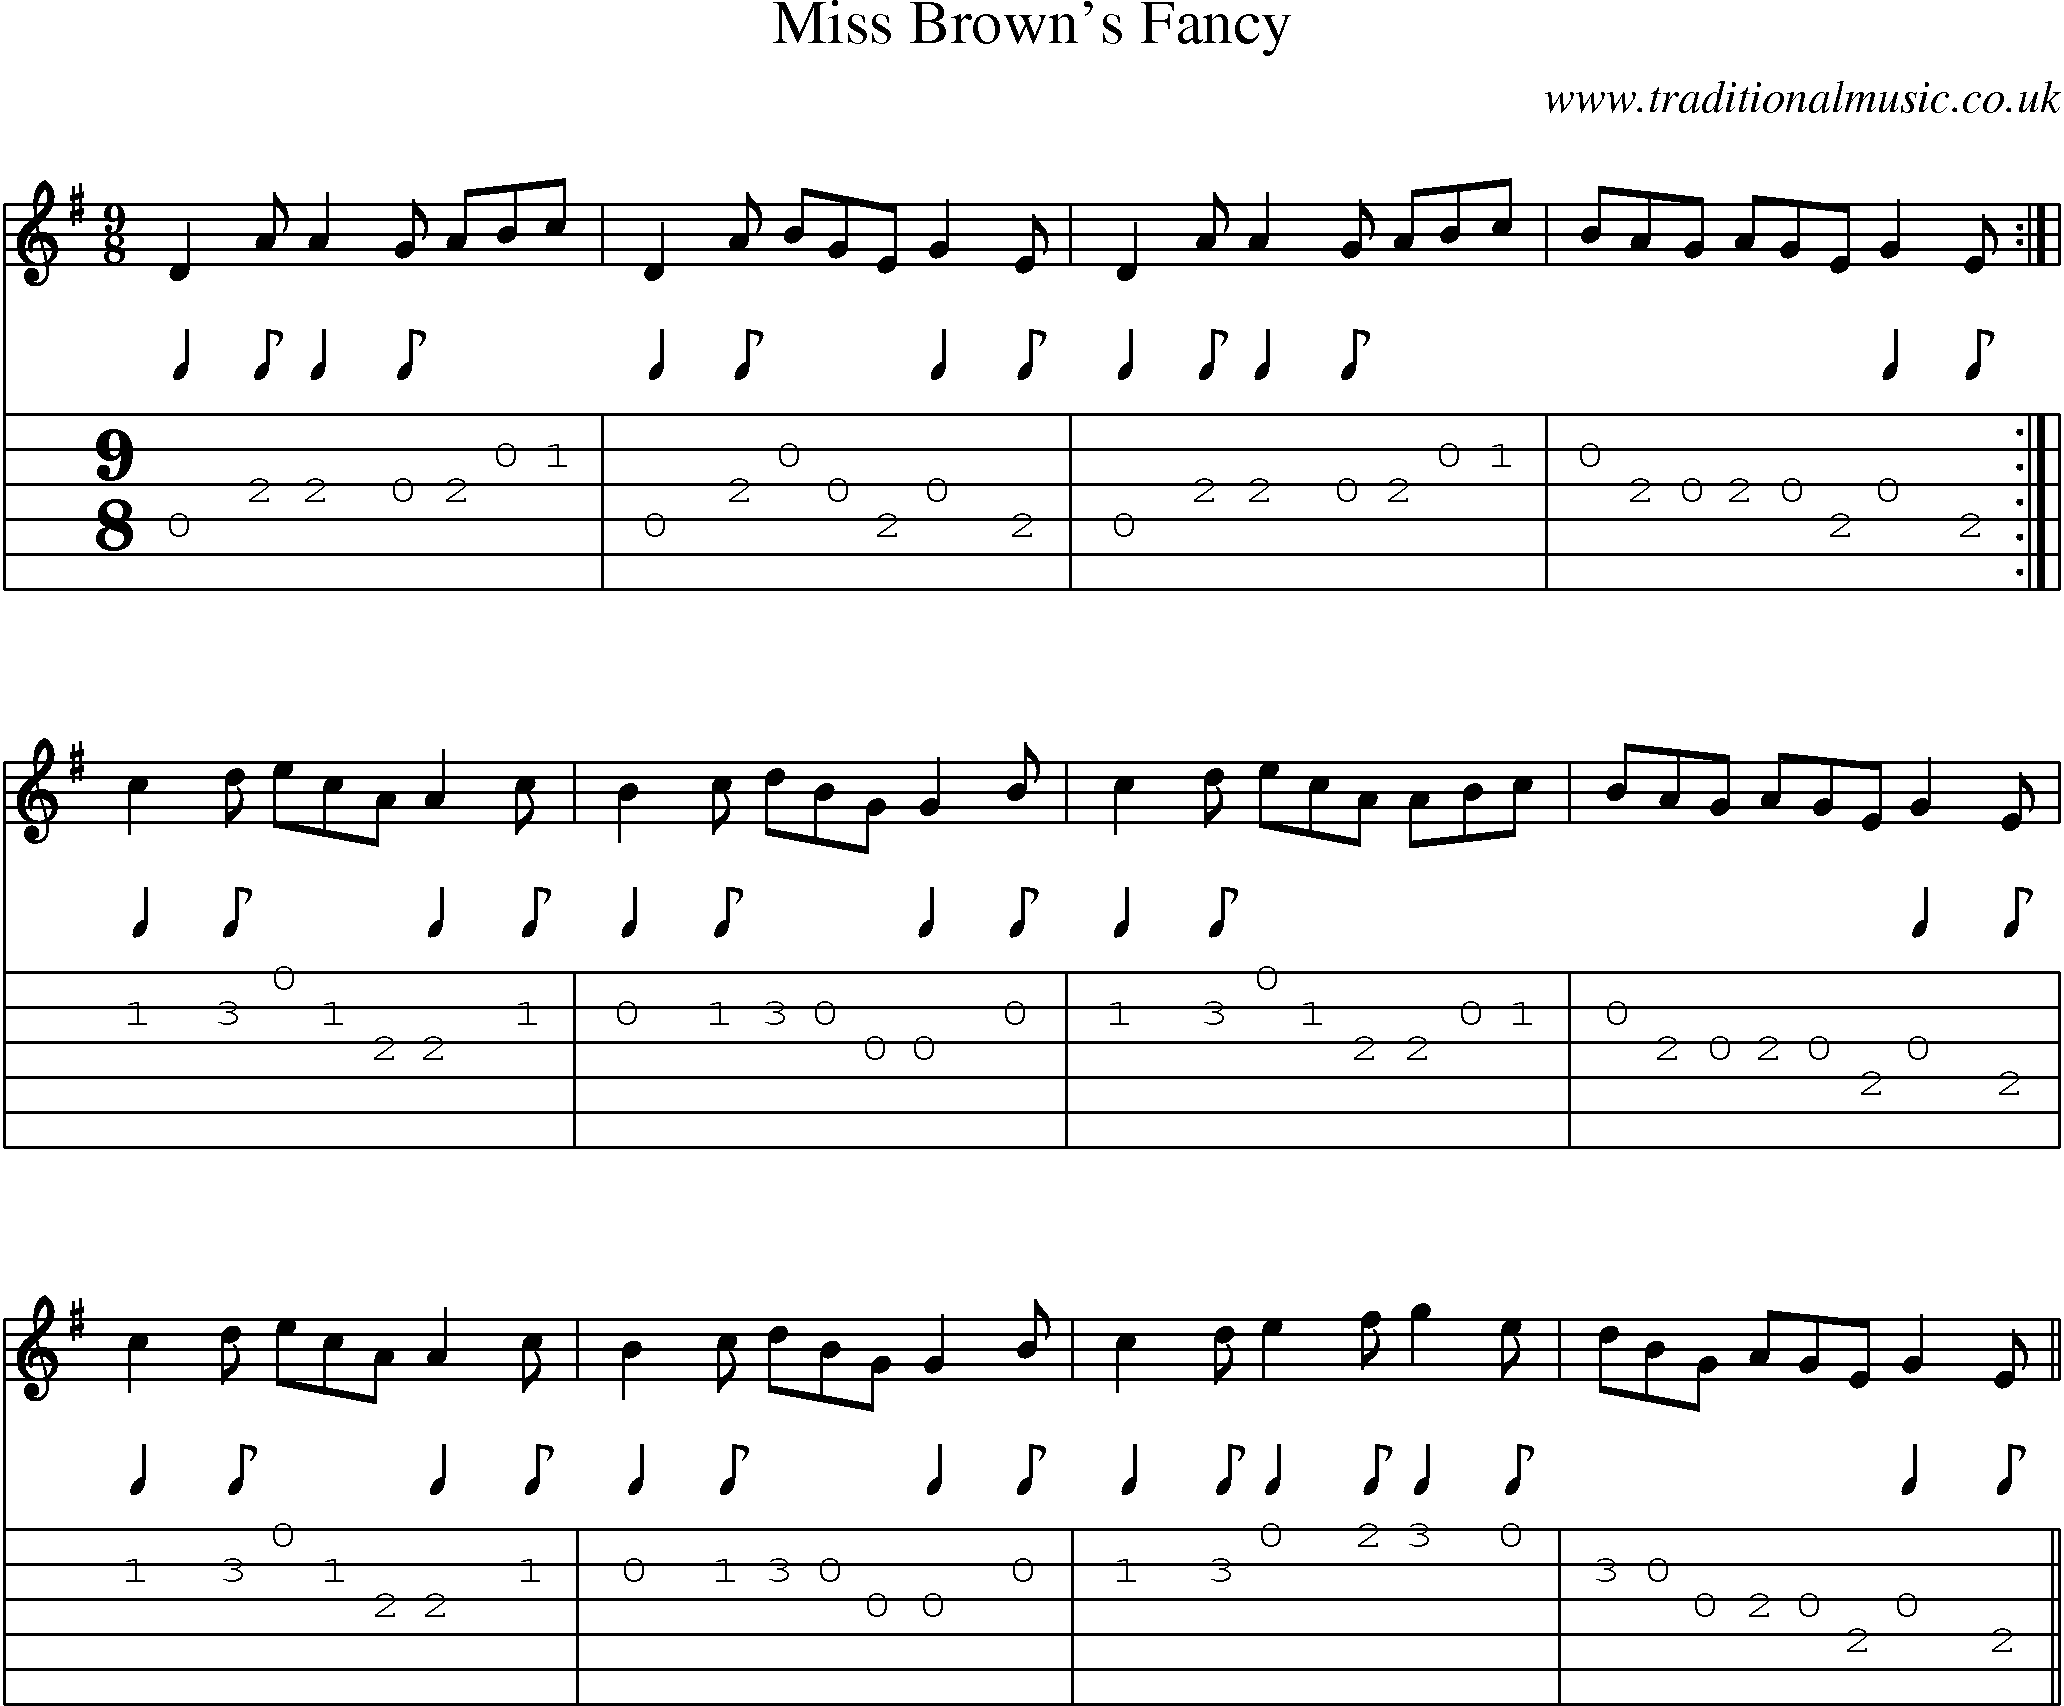 Music Score and Guitar Tabs for Miss Browns Fancy